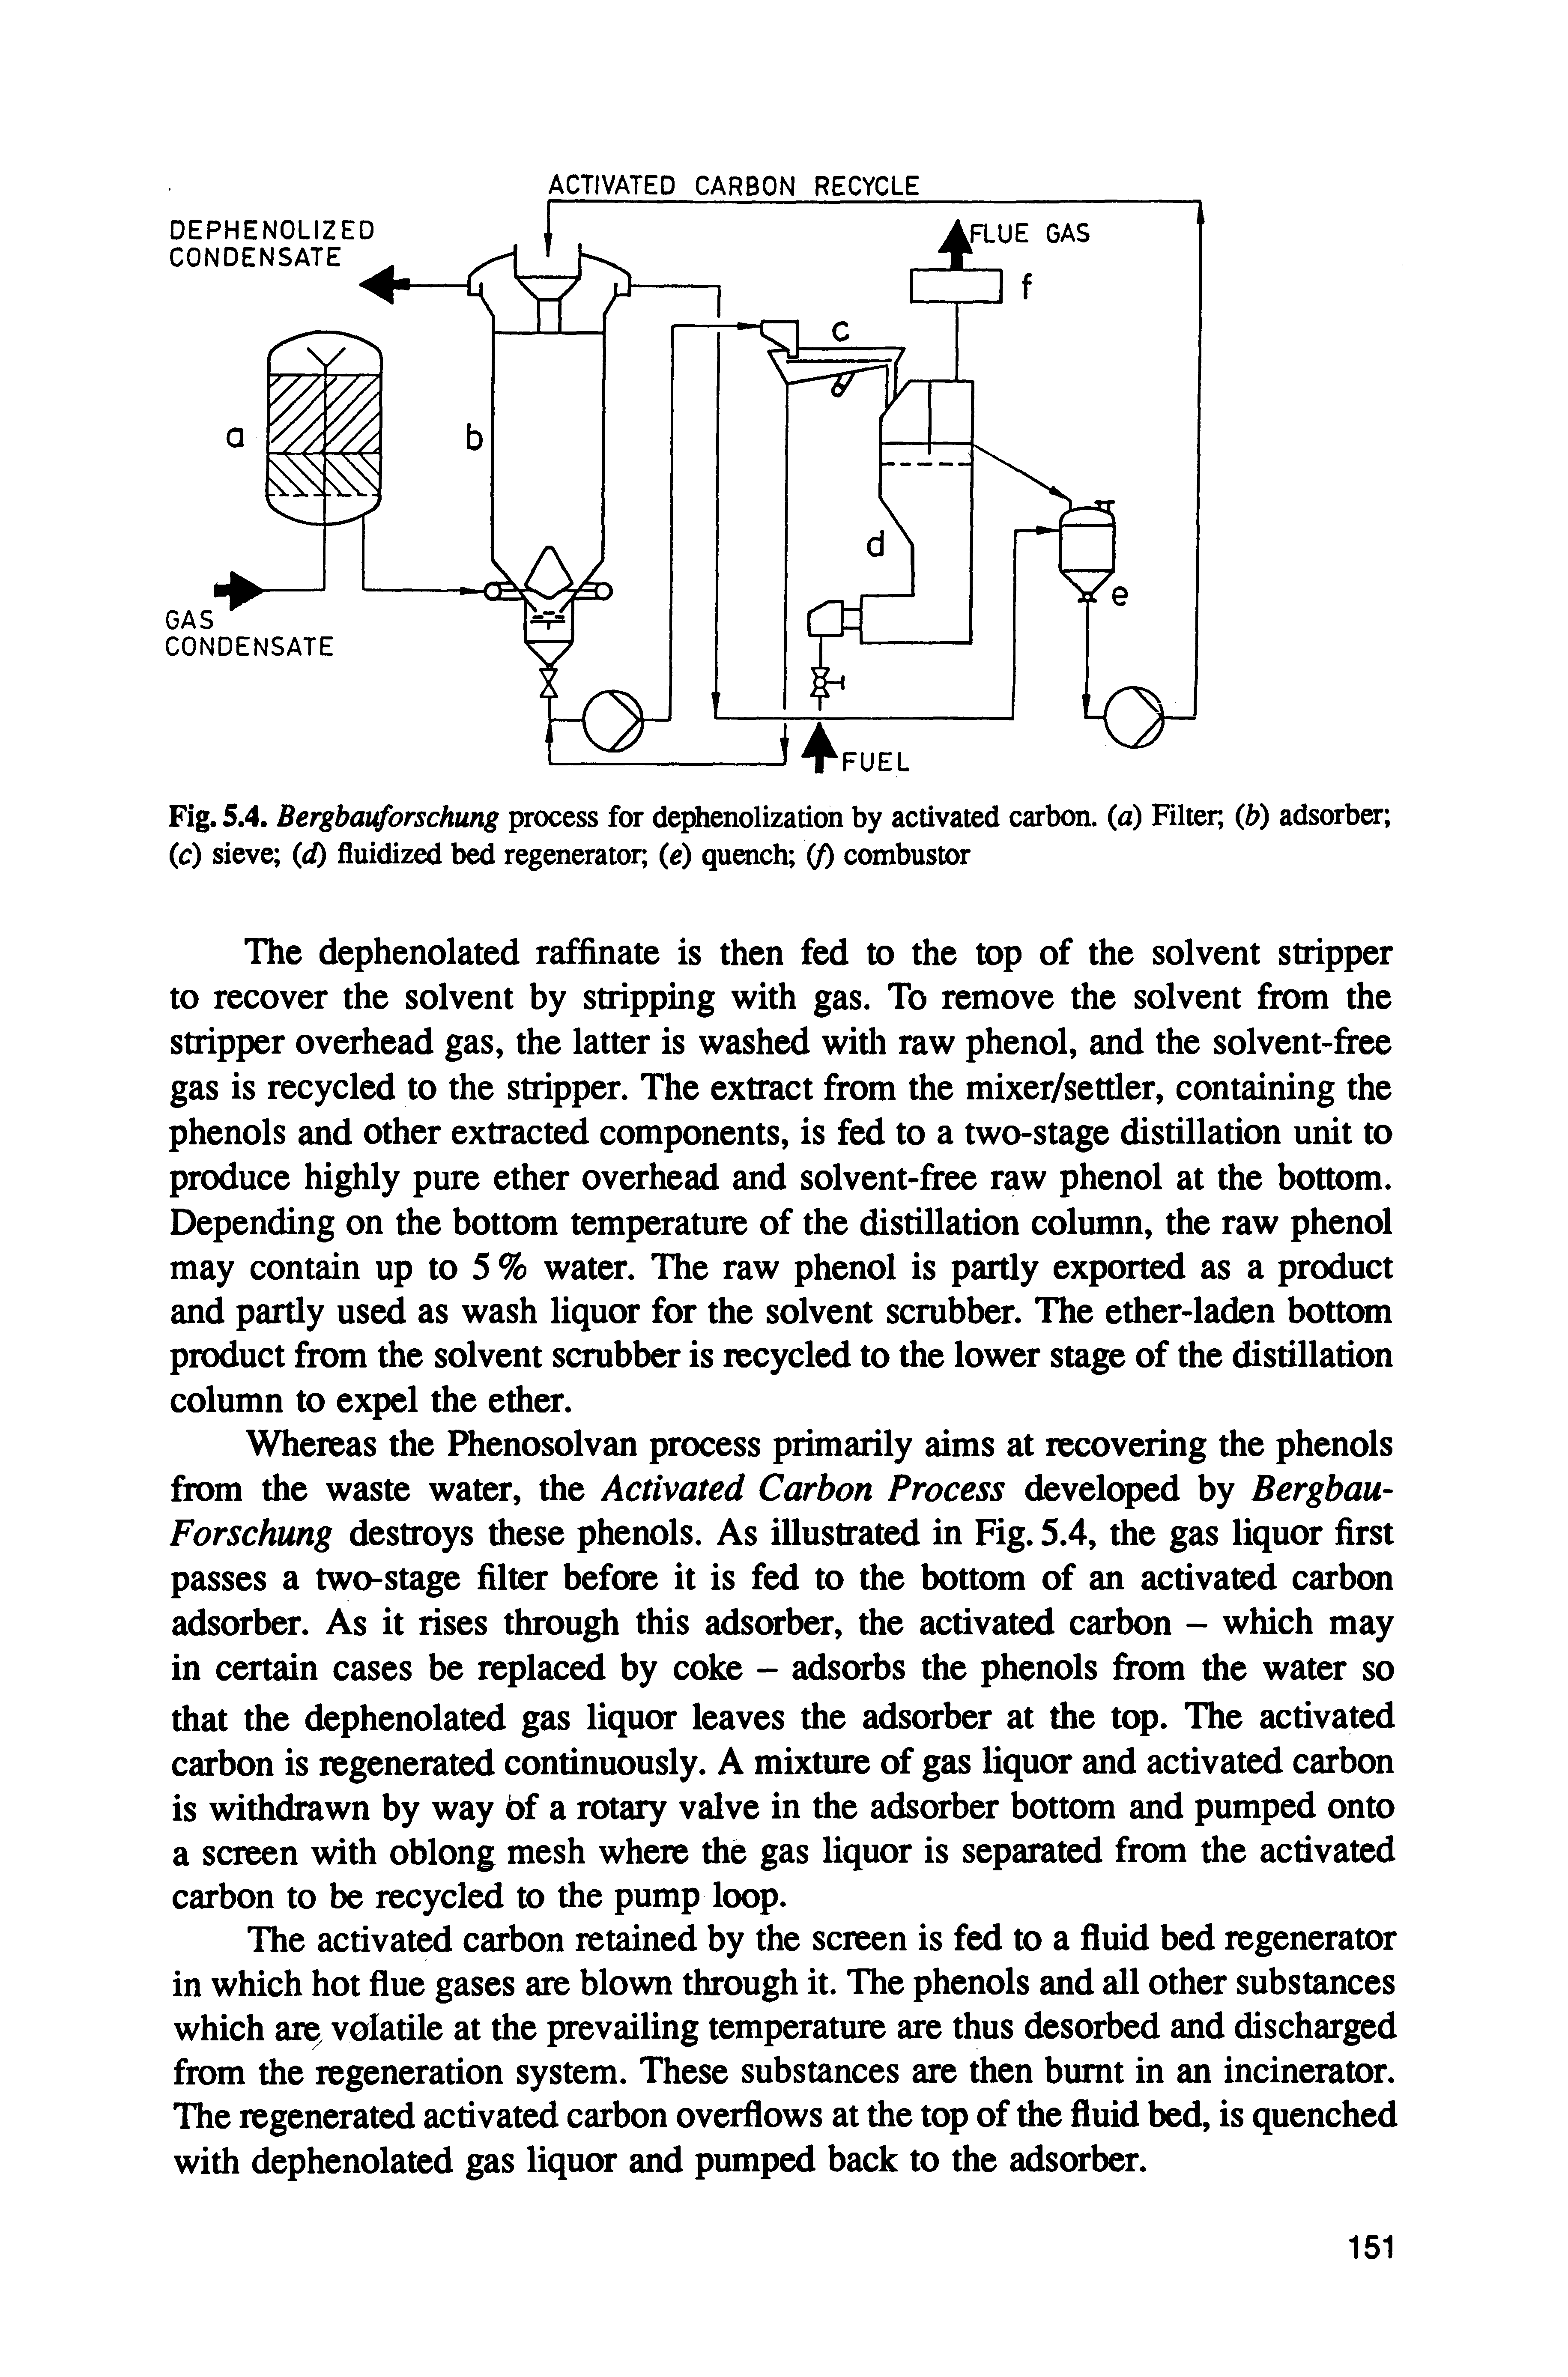 Fig. 5.4. Bergbauforschung process for de Aenolizatian by activated carbon, (a) Hlter (b) adsorbs (c) sieve (d) fluidized bed regenerator, ( ) quench (f) combustor...